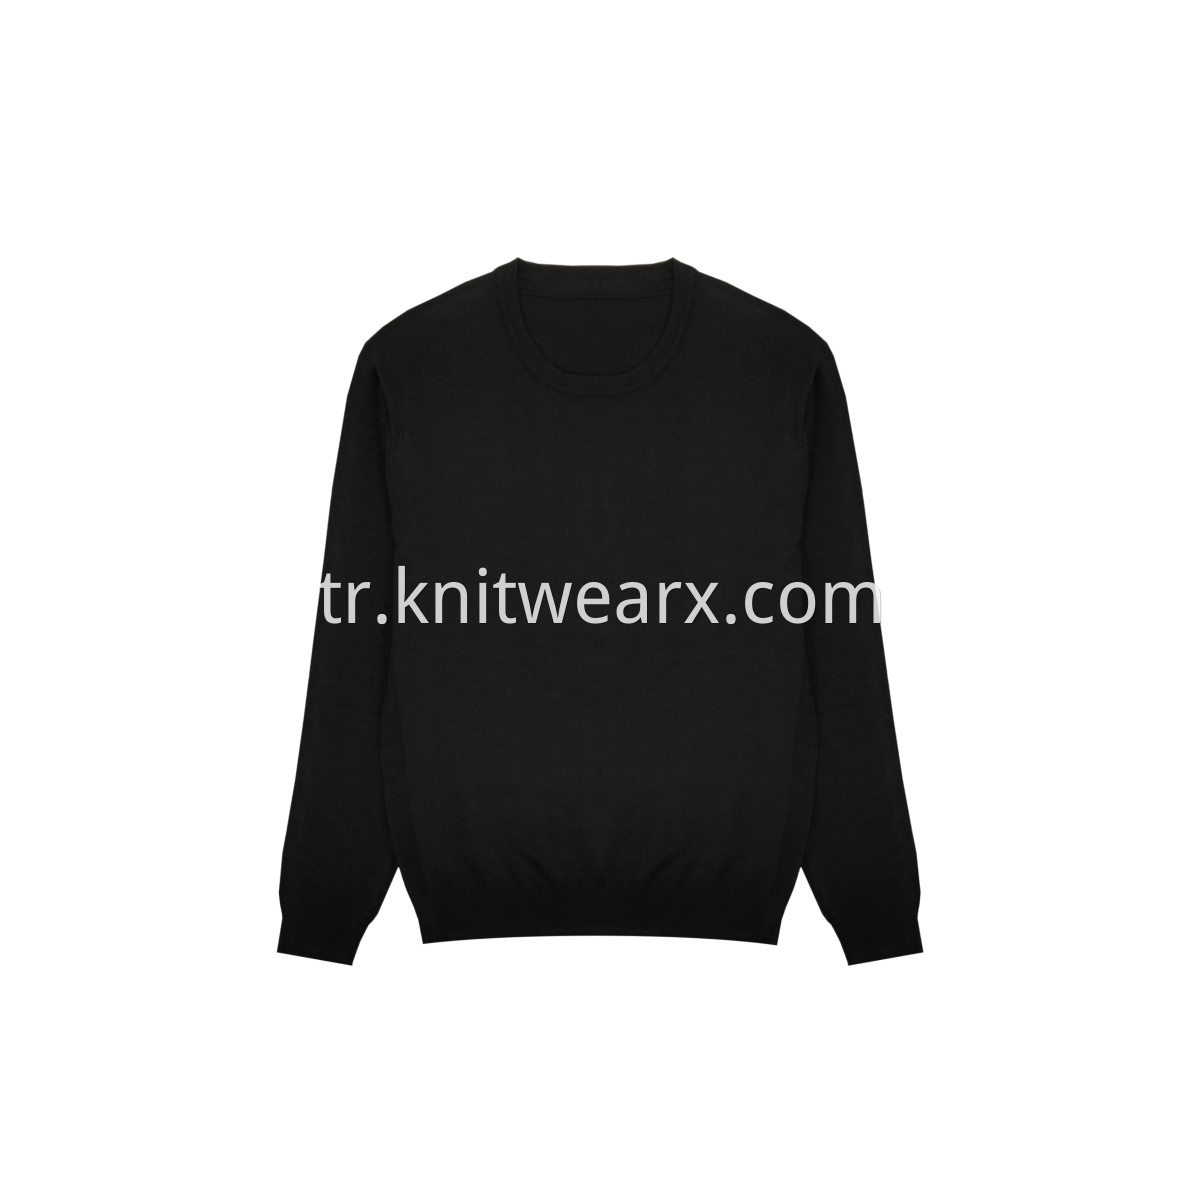 Men's Basic Knitted Sweater Anti-pilling Crewneck Pullover